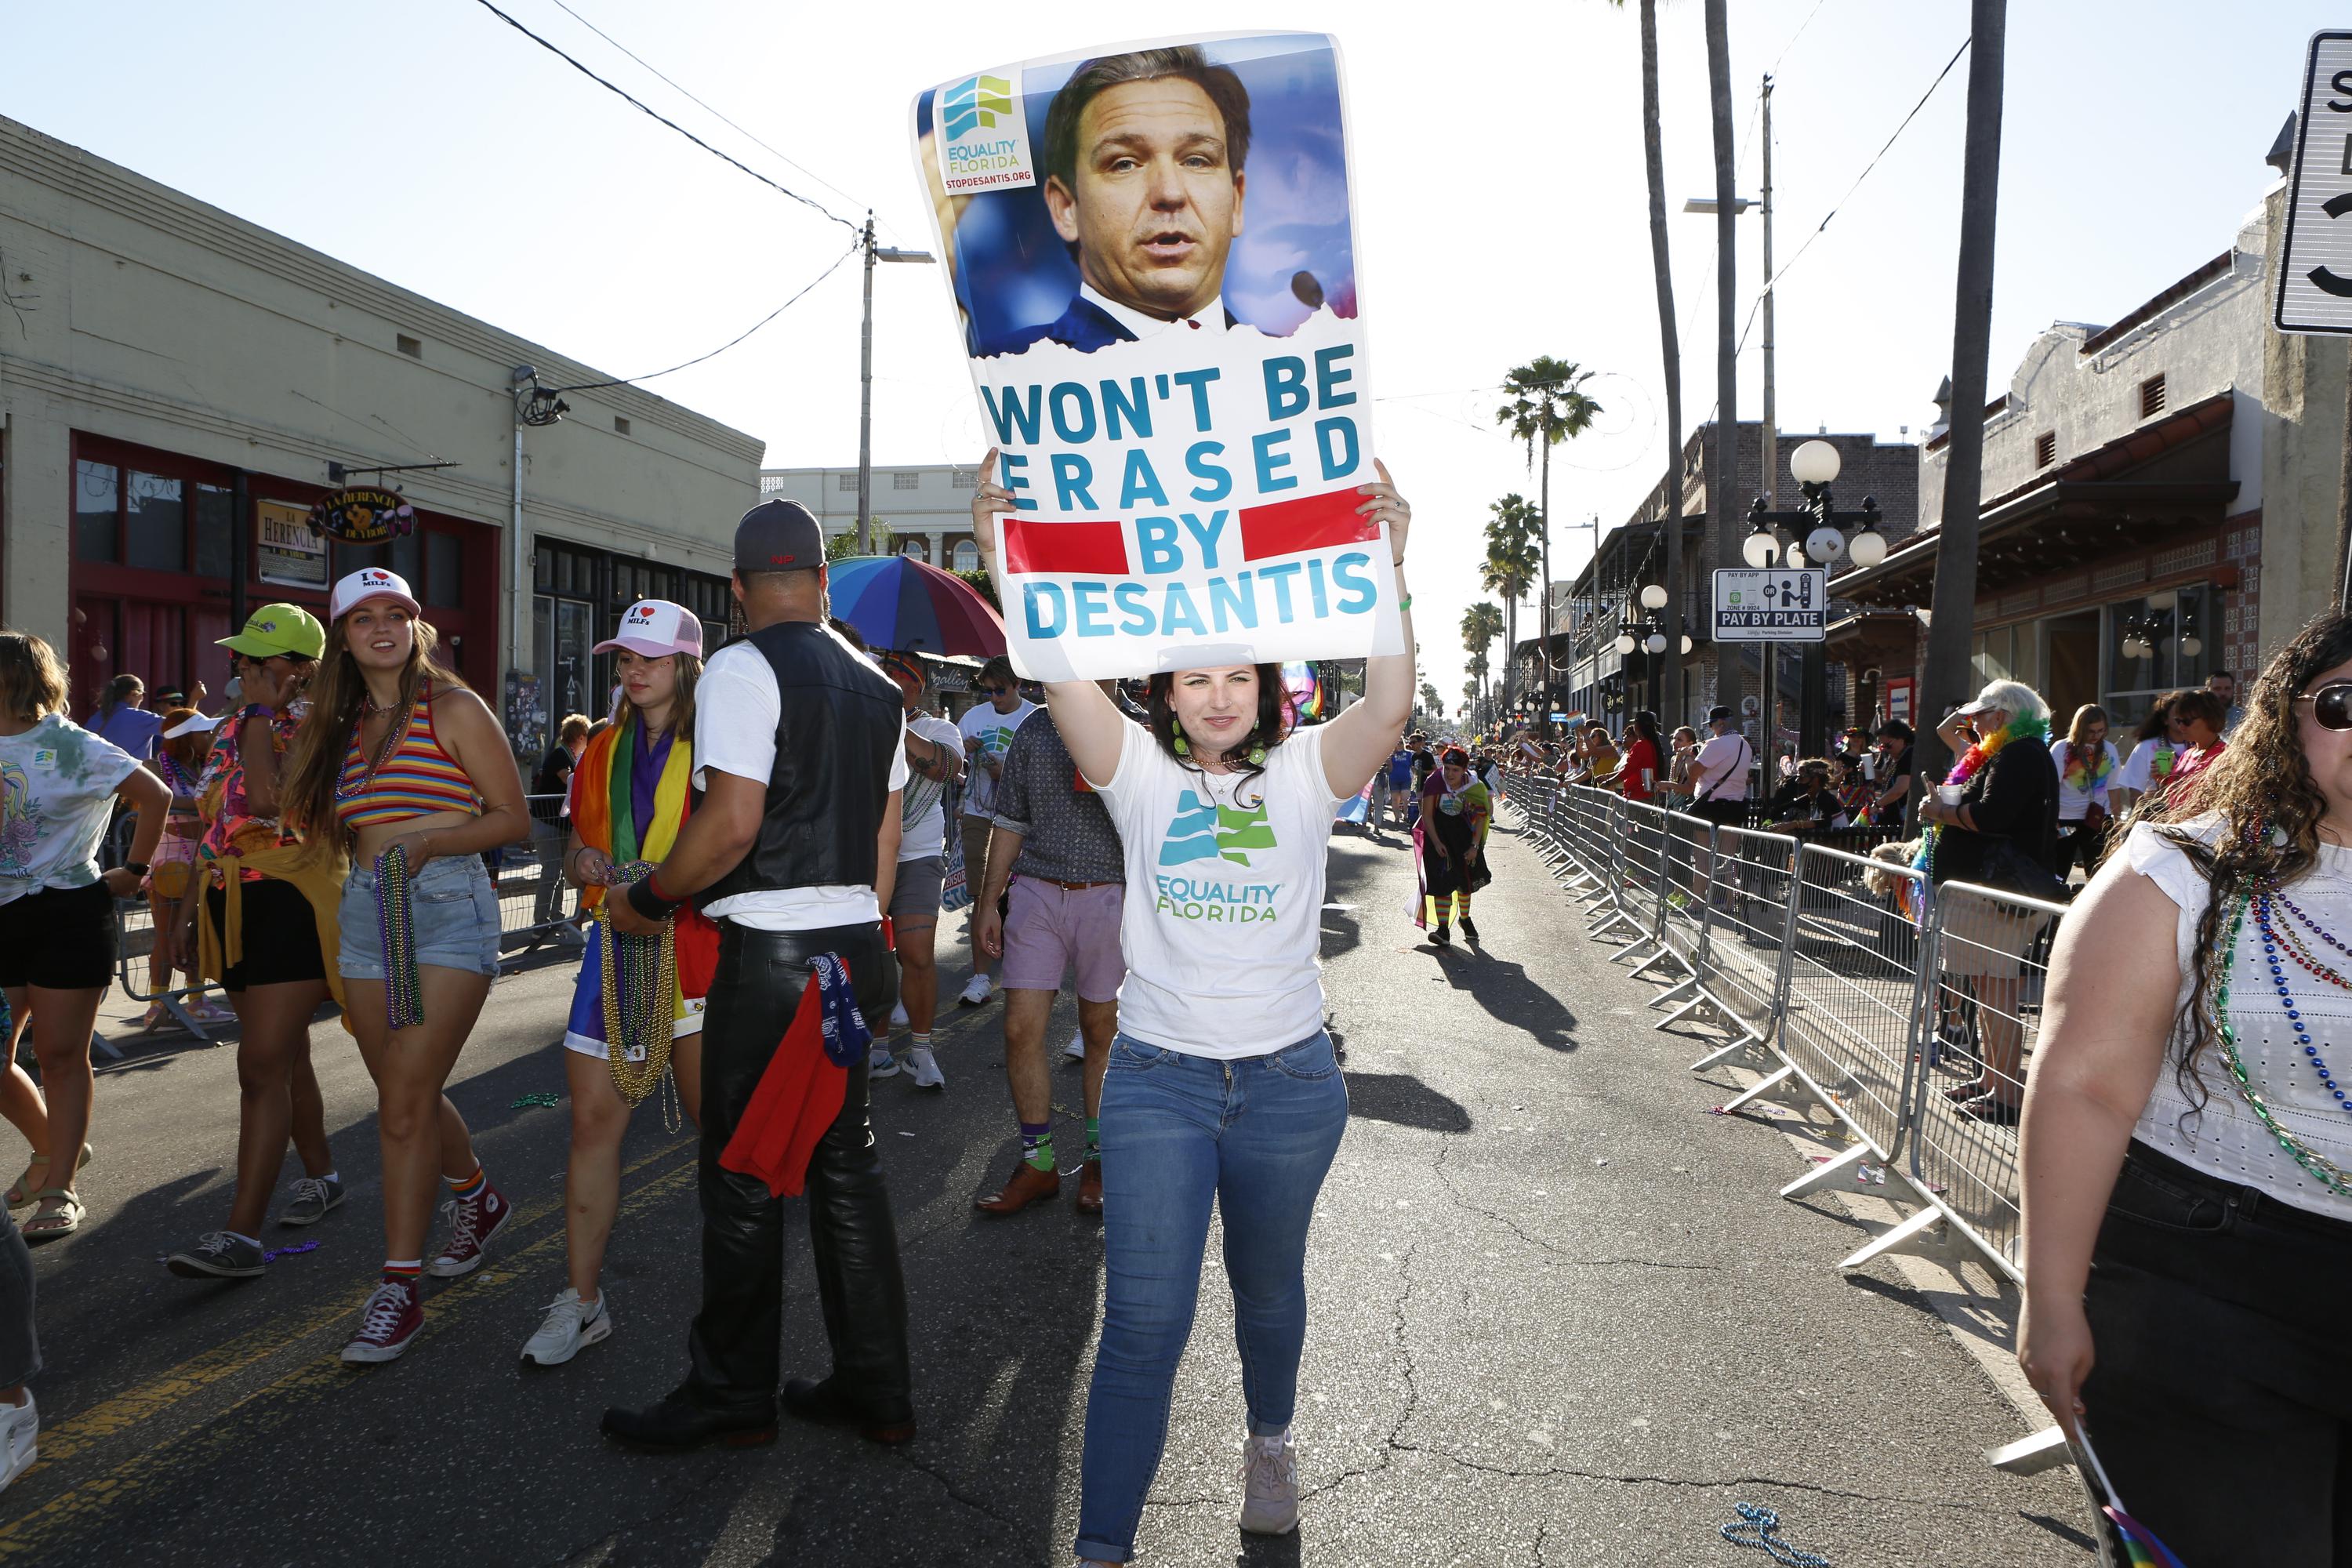 A person holds up a sign that says "Won't Be Erased by DeSantis" as they walk down the street with other parade participants.